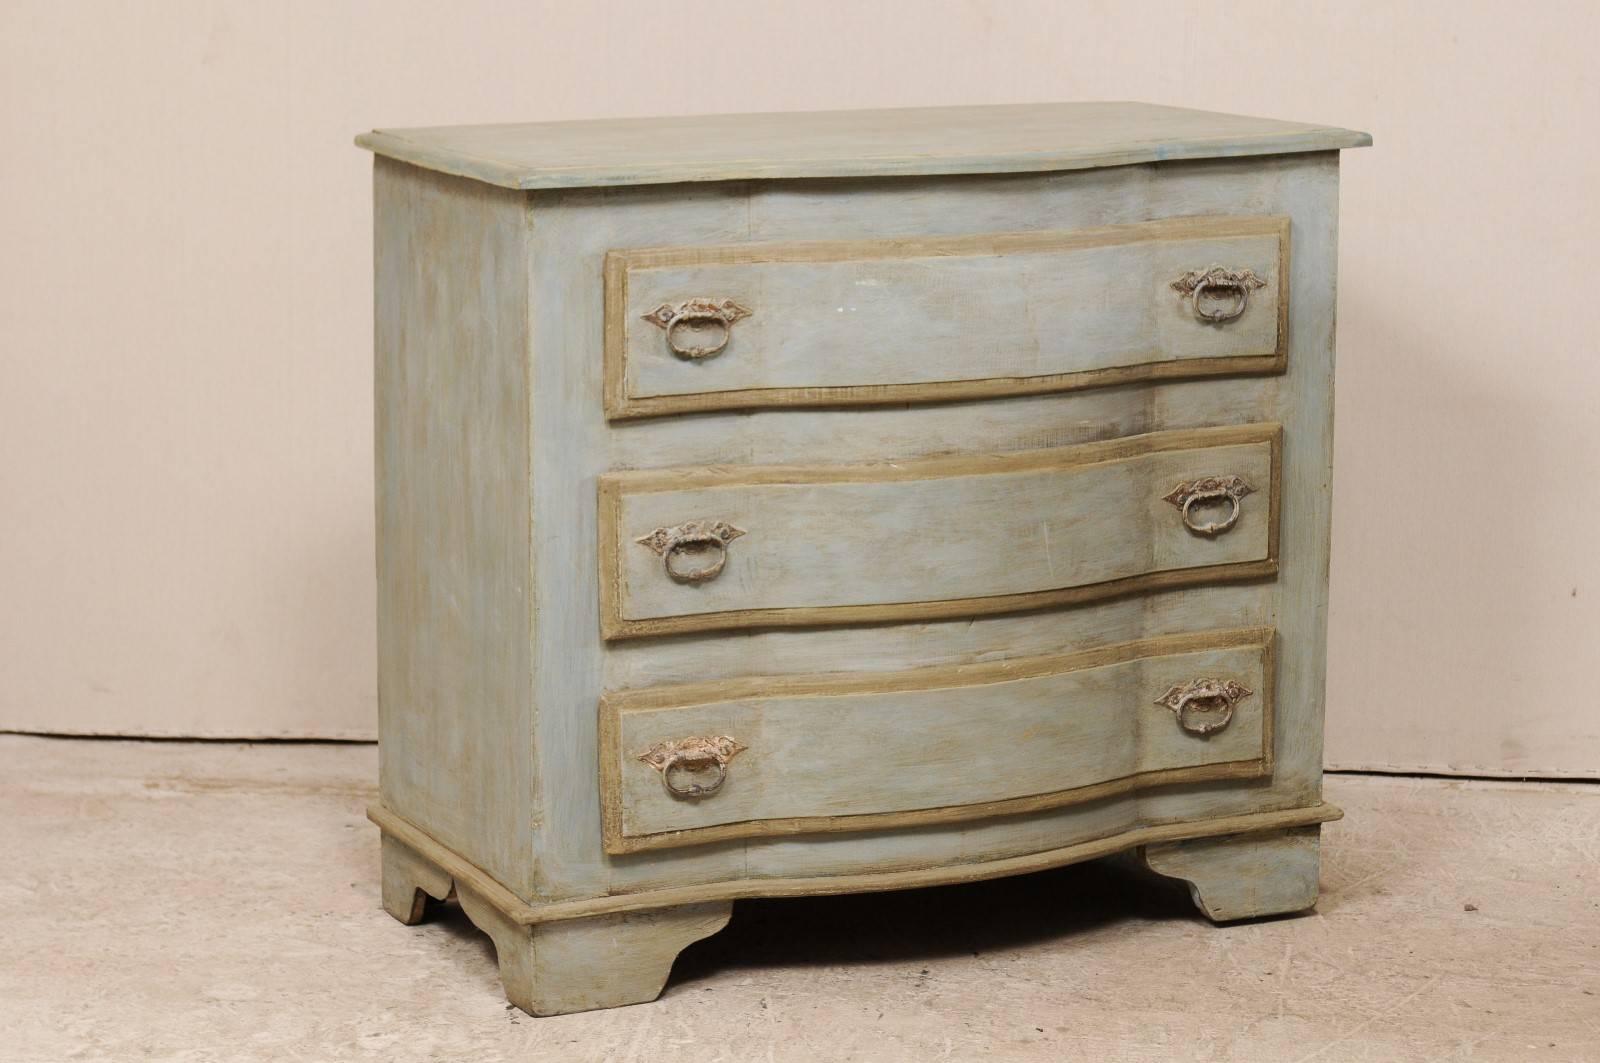 A pair of painted wood three-drawer Brazilian chests. This pair of custom dressers, of old reclaimed wood, each feature three graduated drawers with curvy shaped fronts, slightly overhung tops which have been carved to mimic the design of their